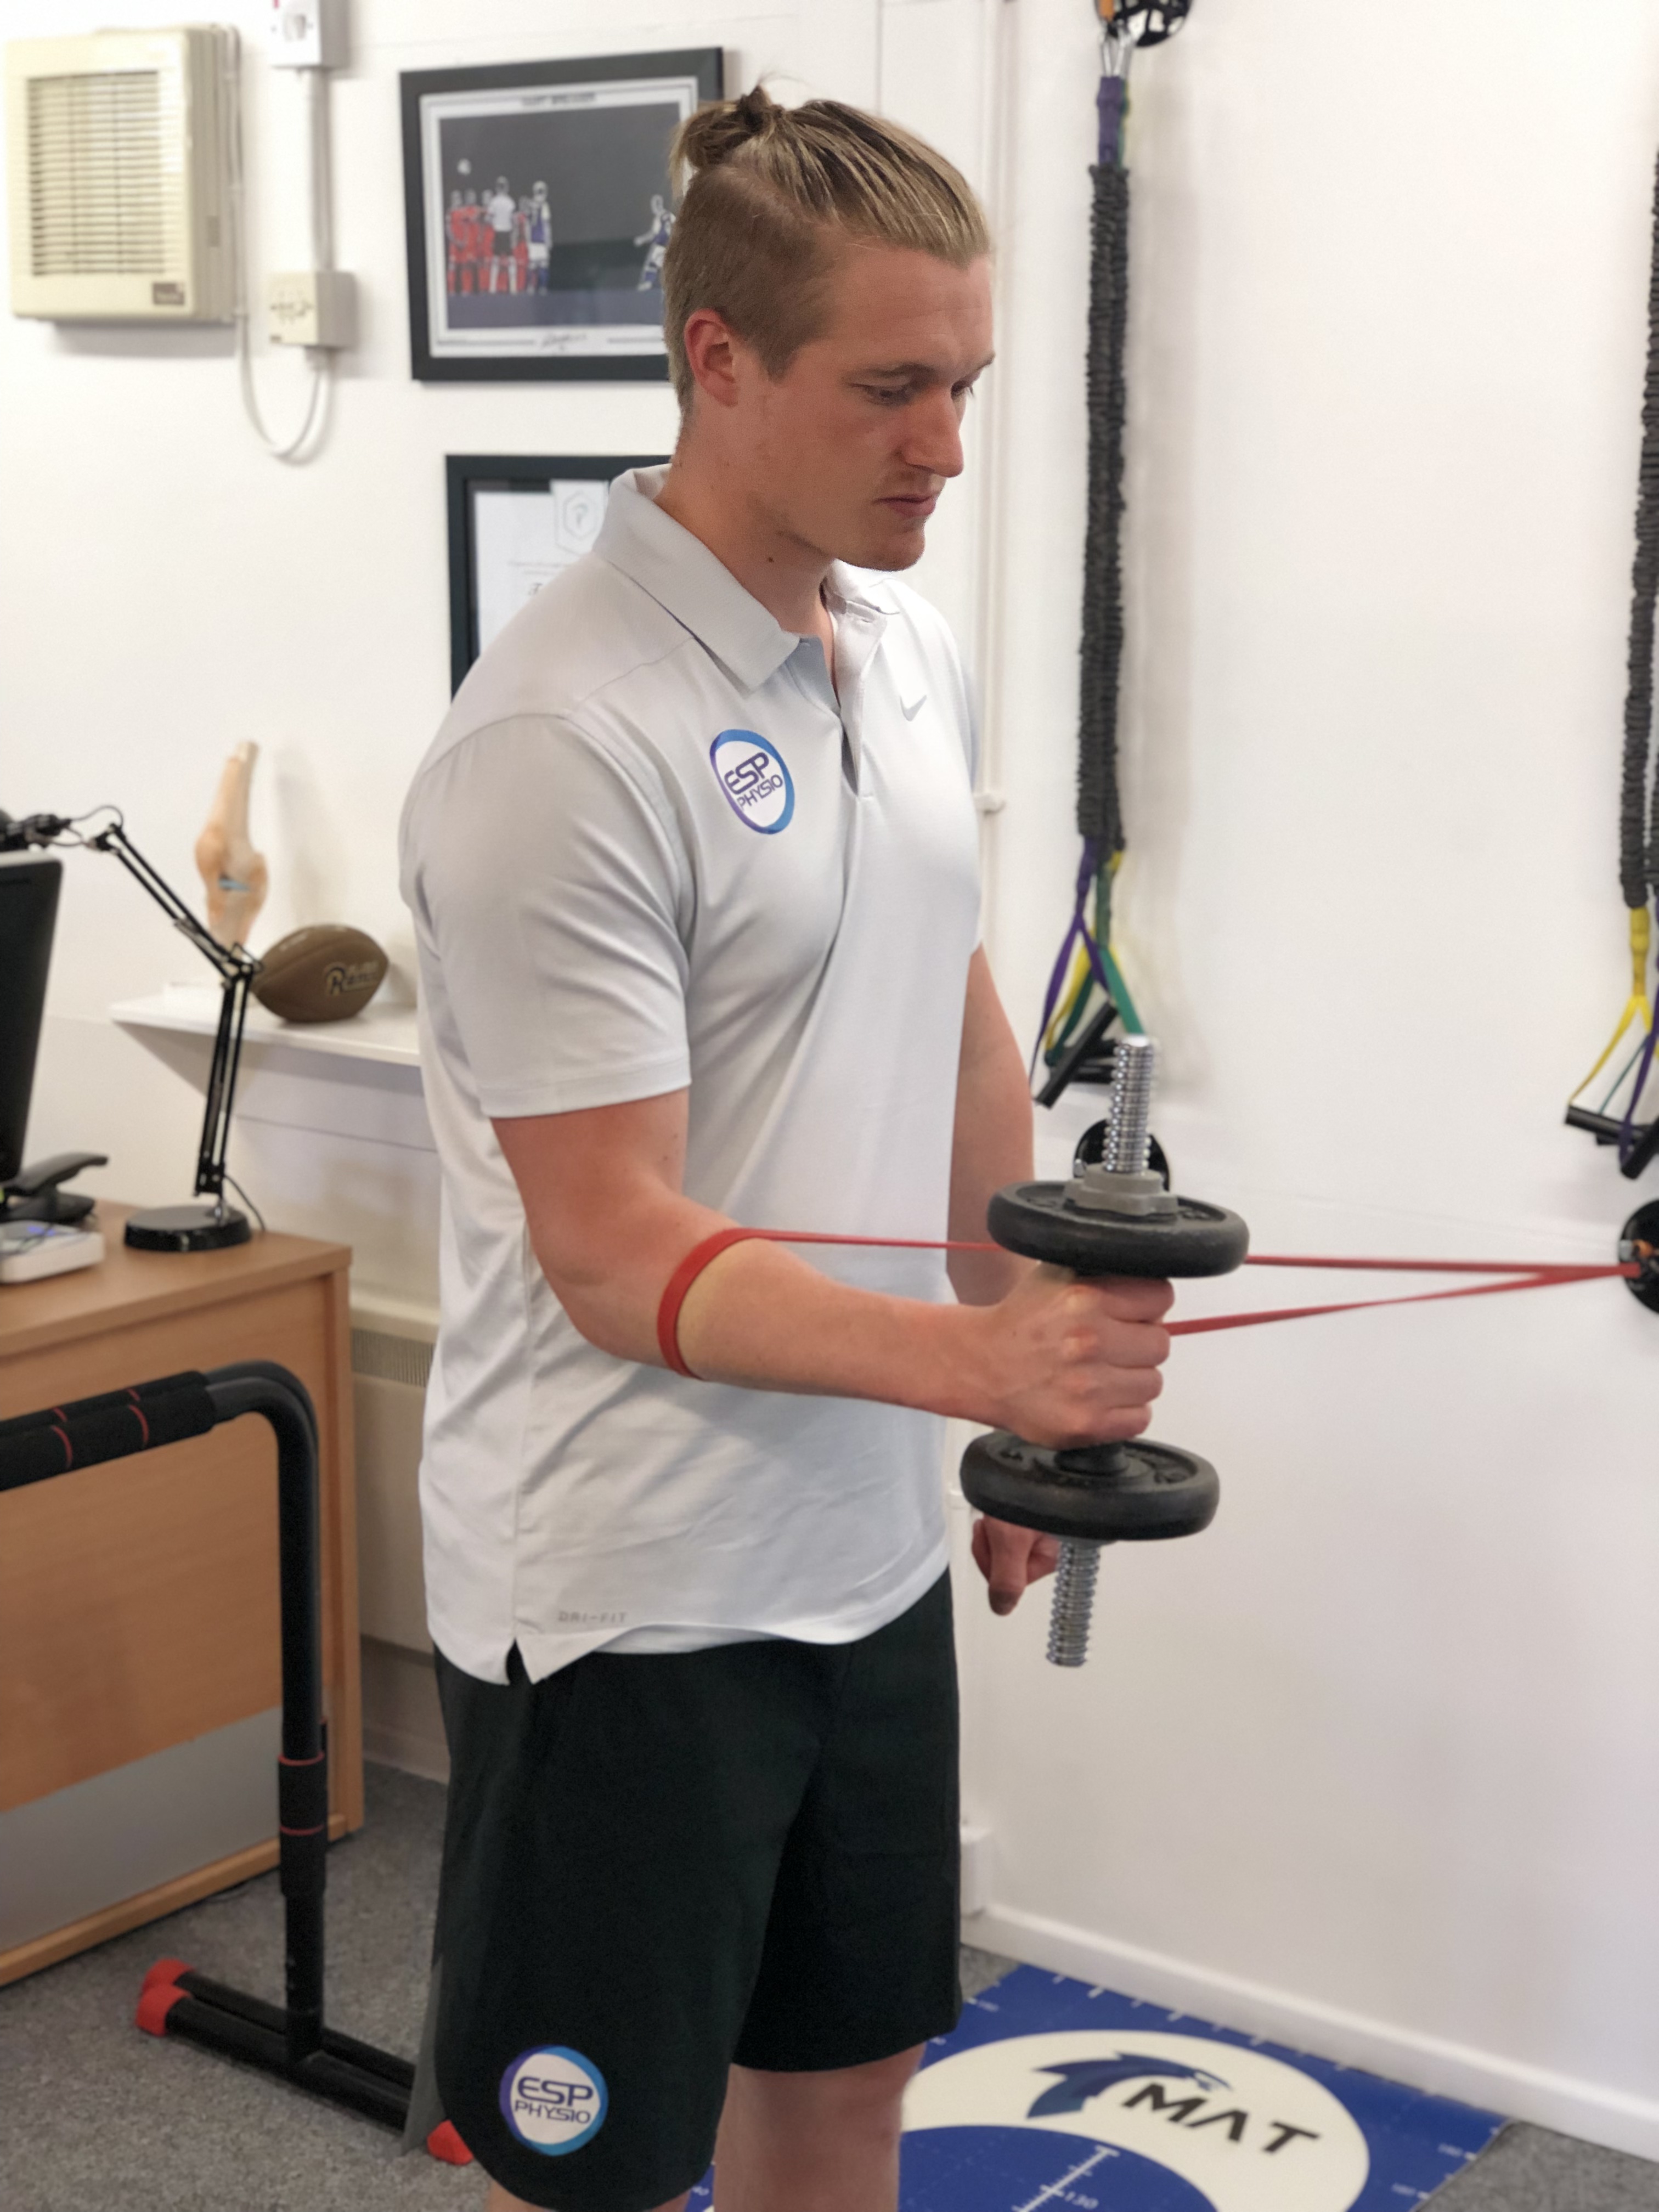 Mobilisation with movement medial radius glide stage 2